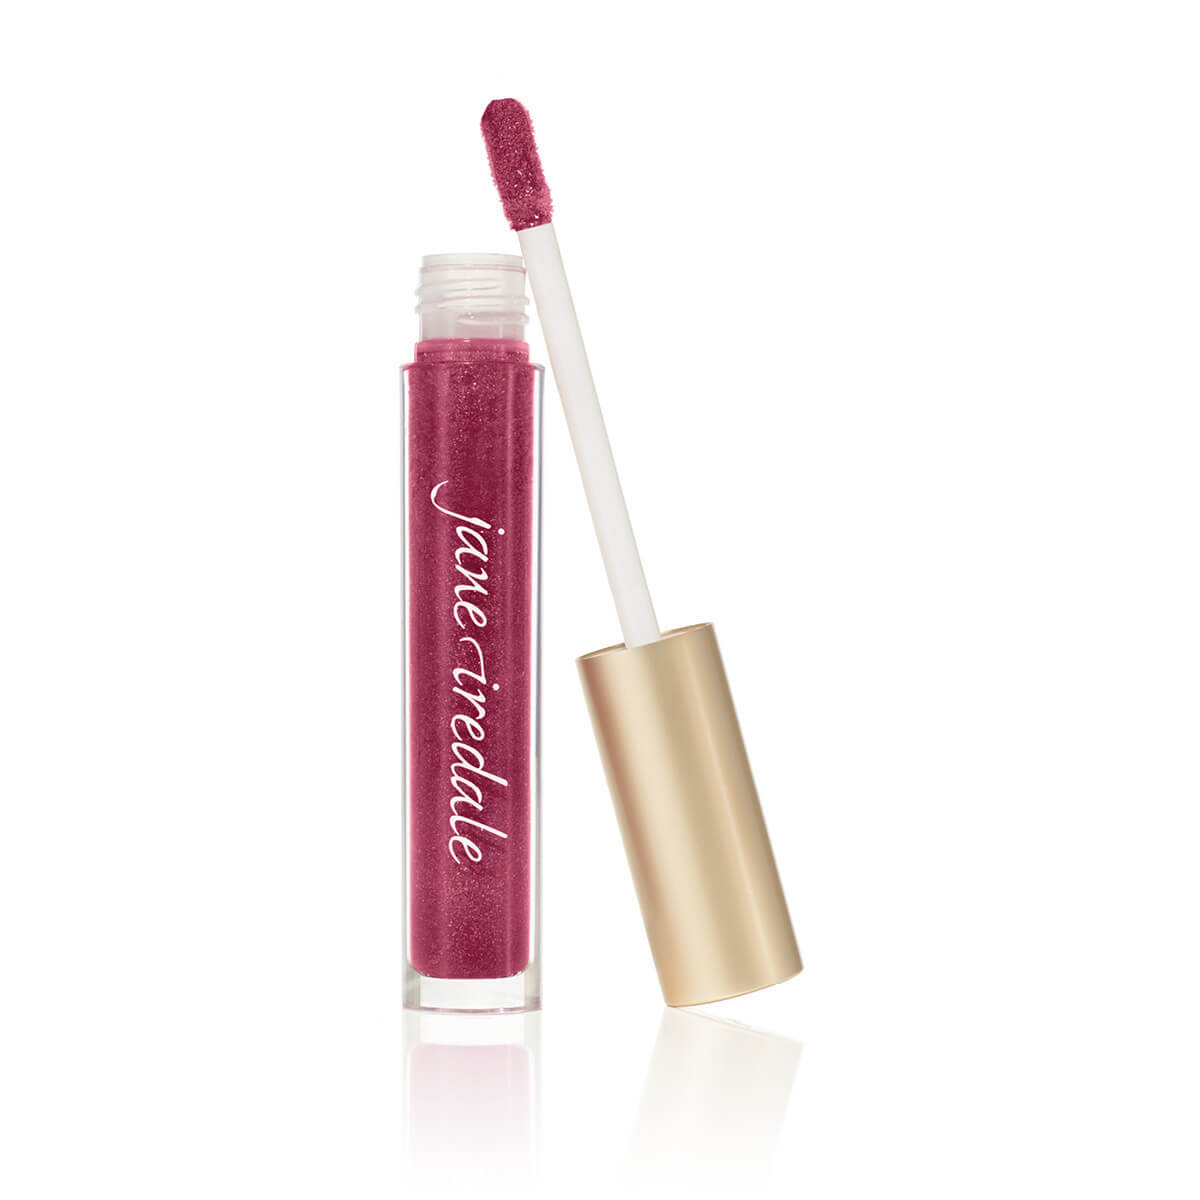 Billede af Jane Iredale HydroPure Hyaluronic Lip Gloss Candied Rose - 3.75 ml.